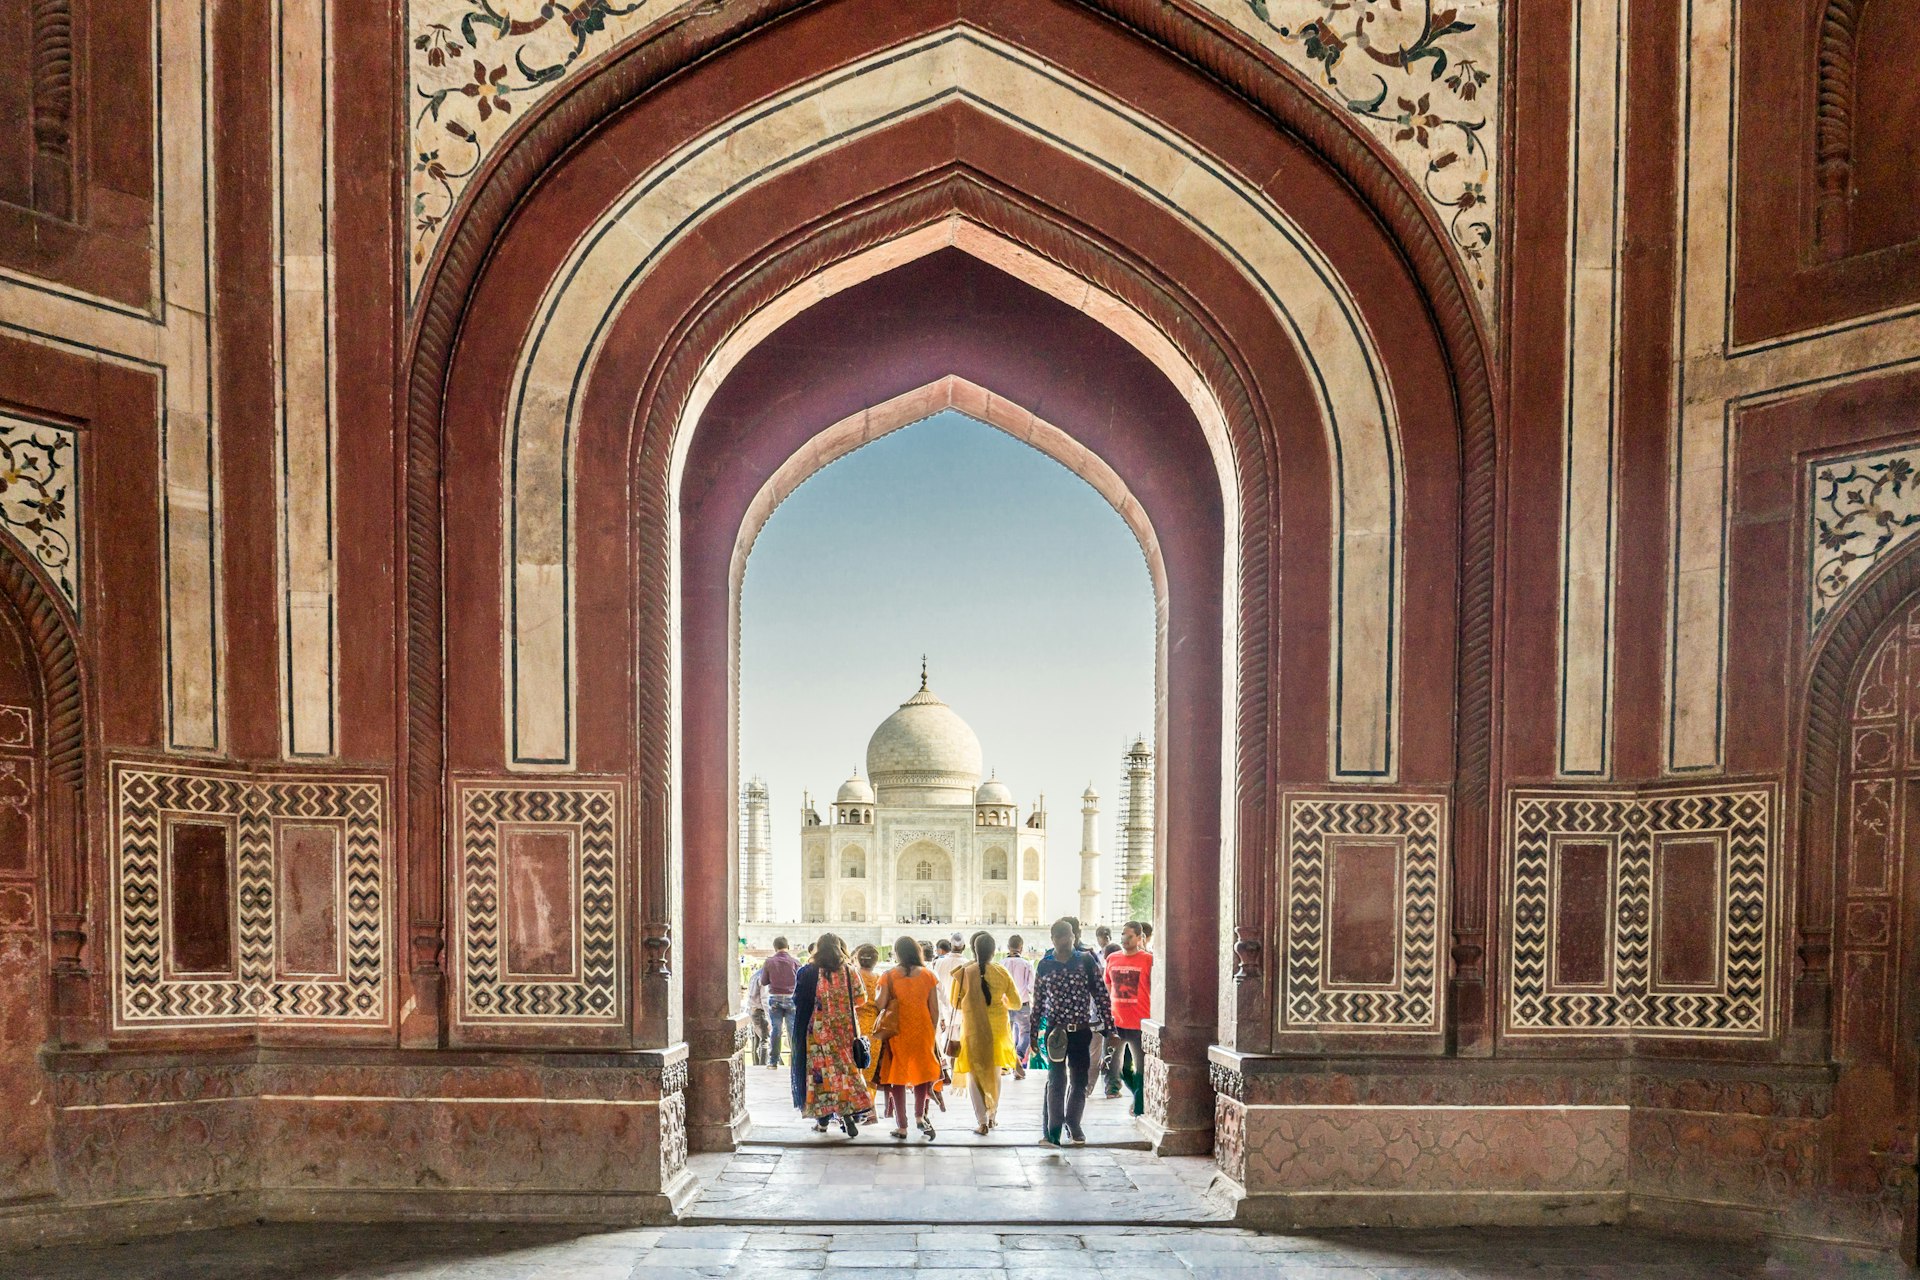 People in colorful clothes pass through an arched doorway. Beyond them is a great white marble dome of the the iconic Taj Mahal